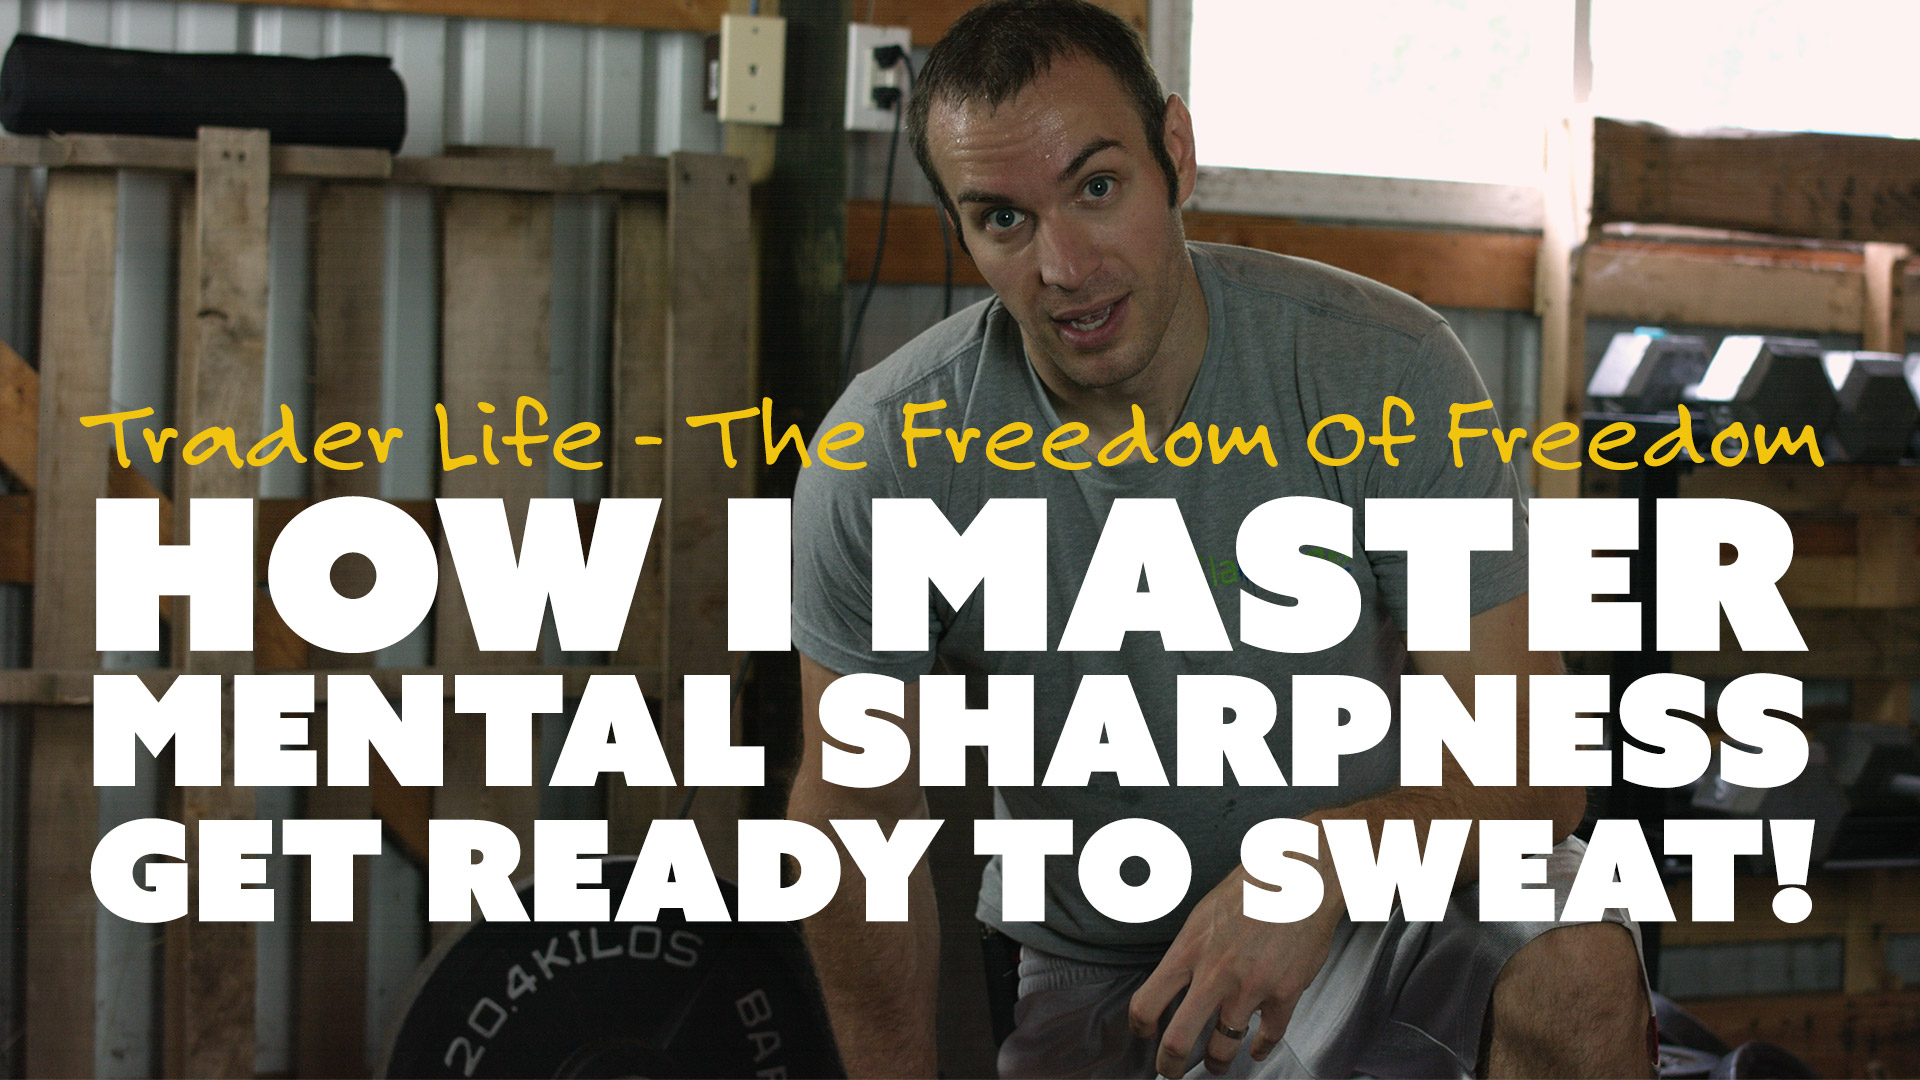 How I Master Mental Sharpness - Get Ready to Sweat!